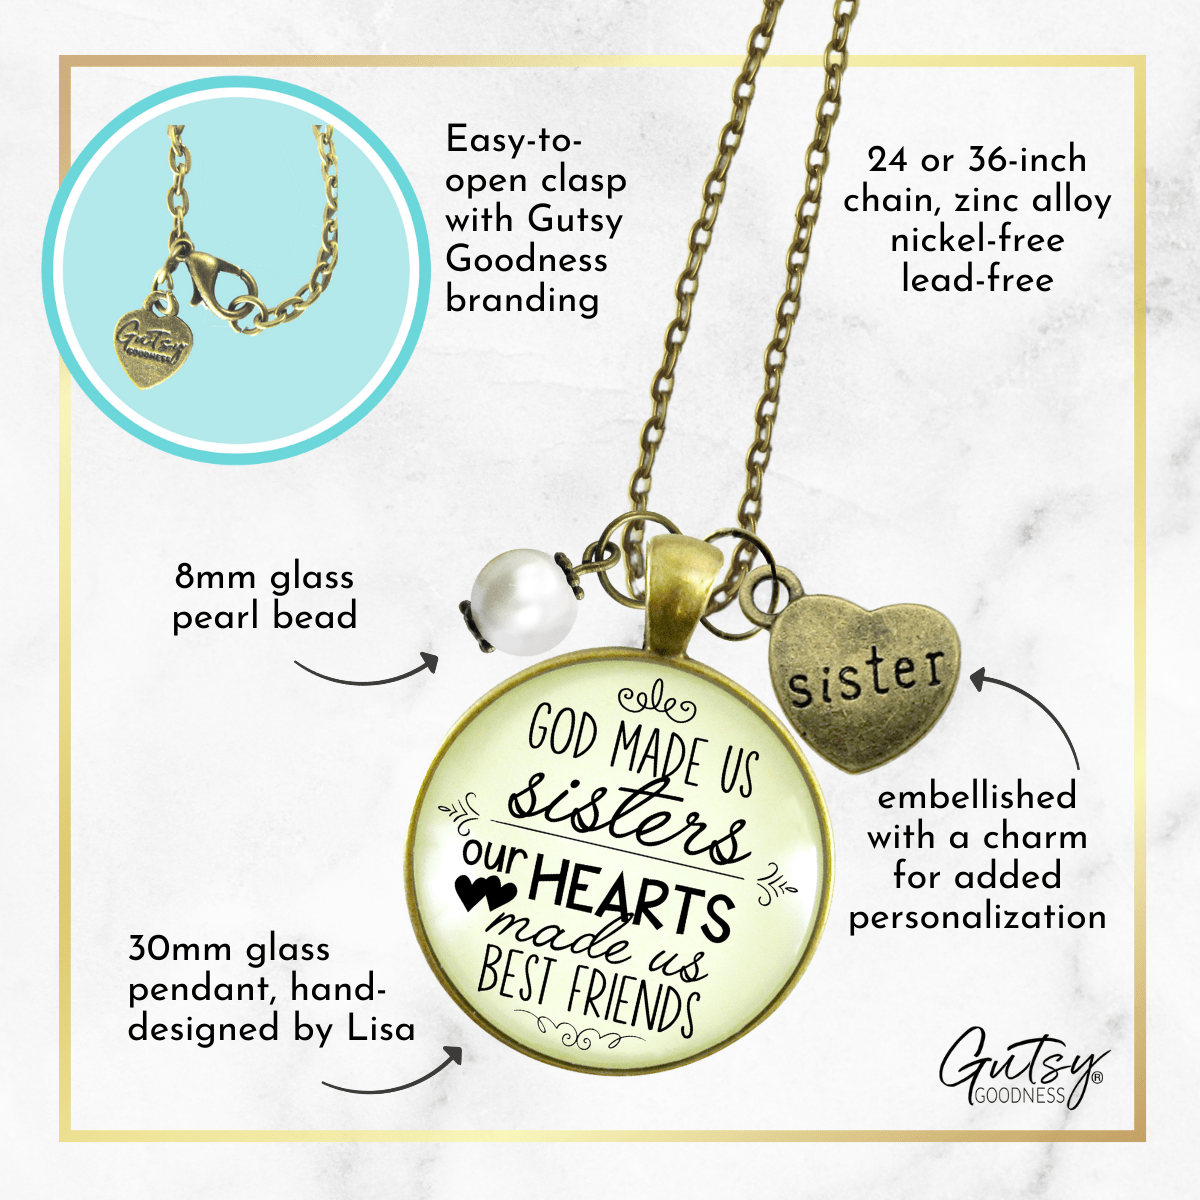 Gutsy Goodness Sisters Necklace God Made Us Sisters Best Friends Faith Jewelry Gift - Gutsy Goodness Handmade Jewelry;Sisters Necklace God Made Us Sisters Best Friends Faith Jewelry Gift - Gutsy Goodness Handmade Jewelry Gifts